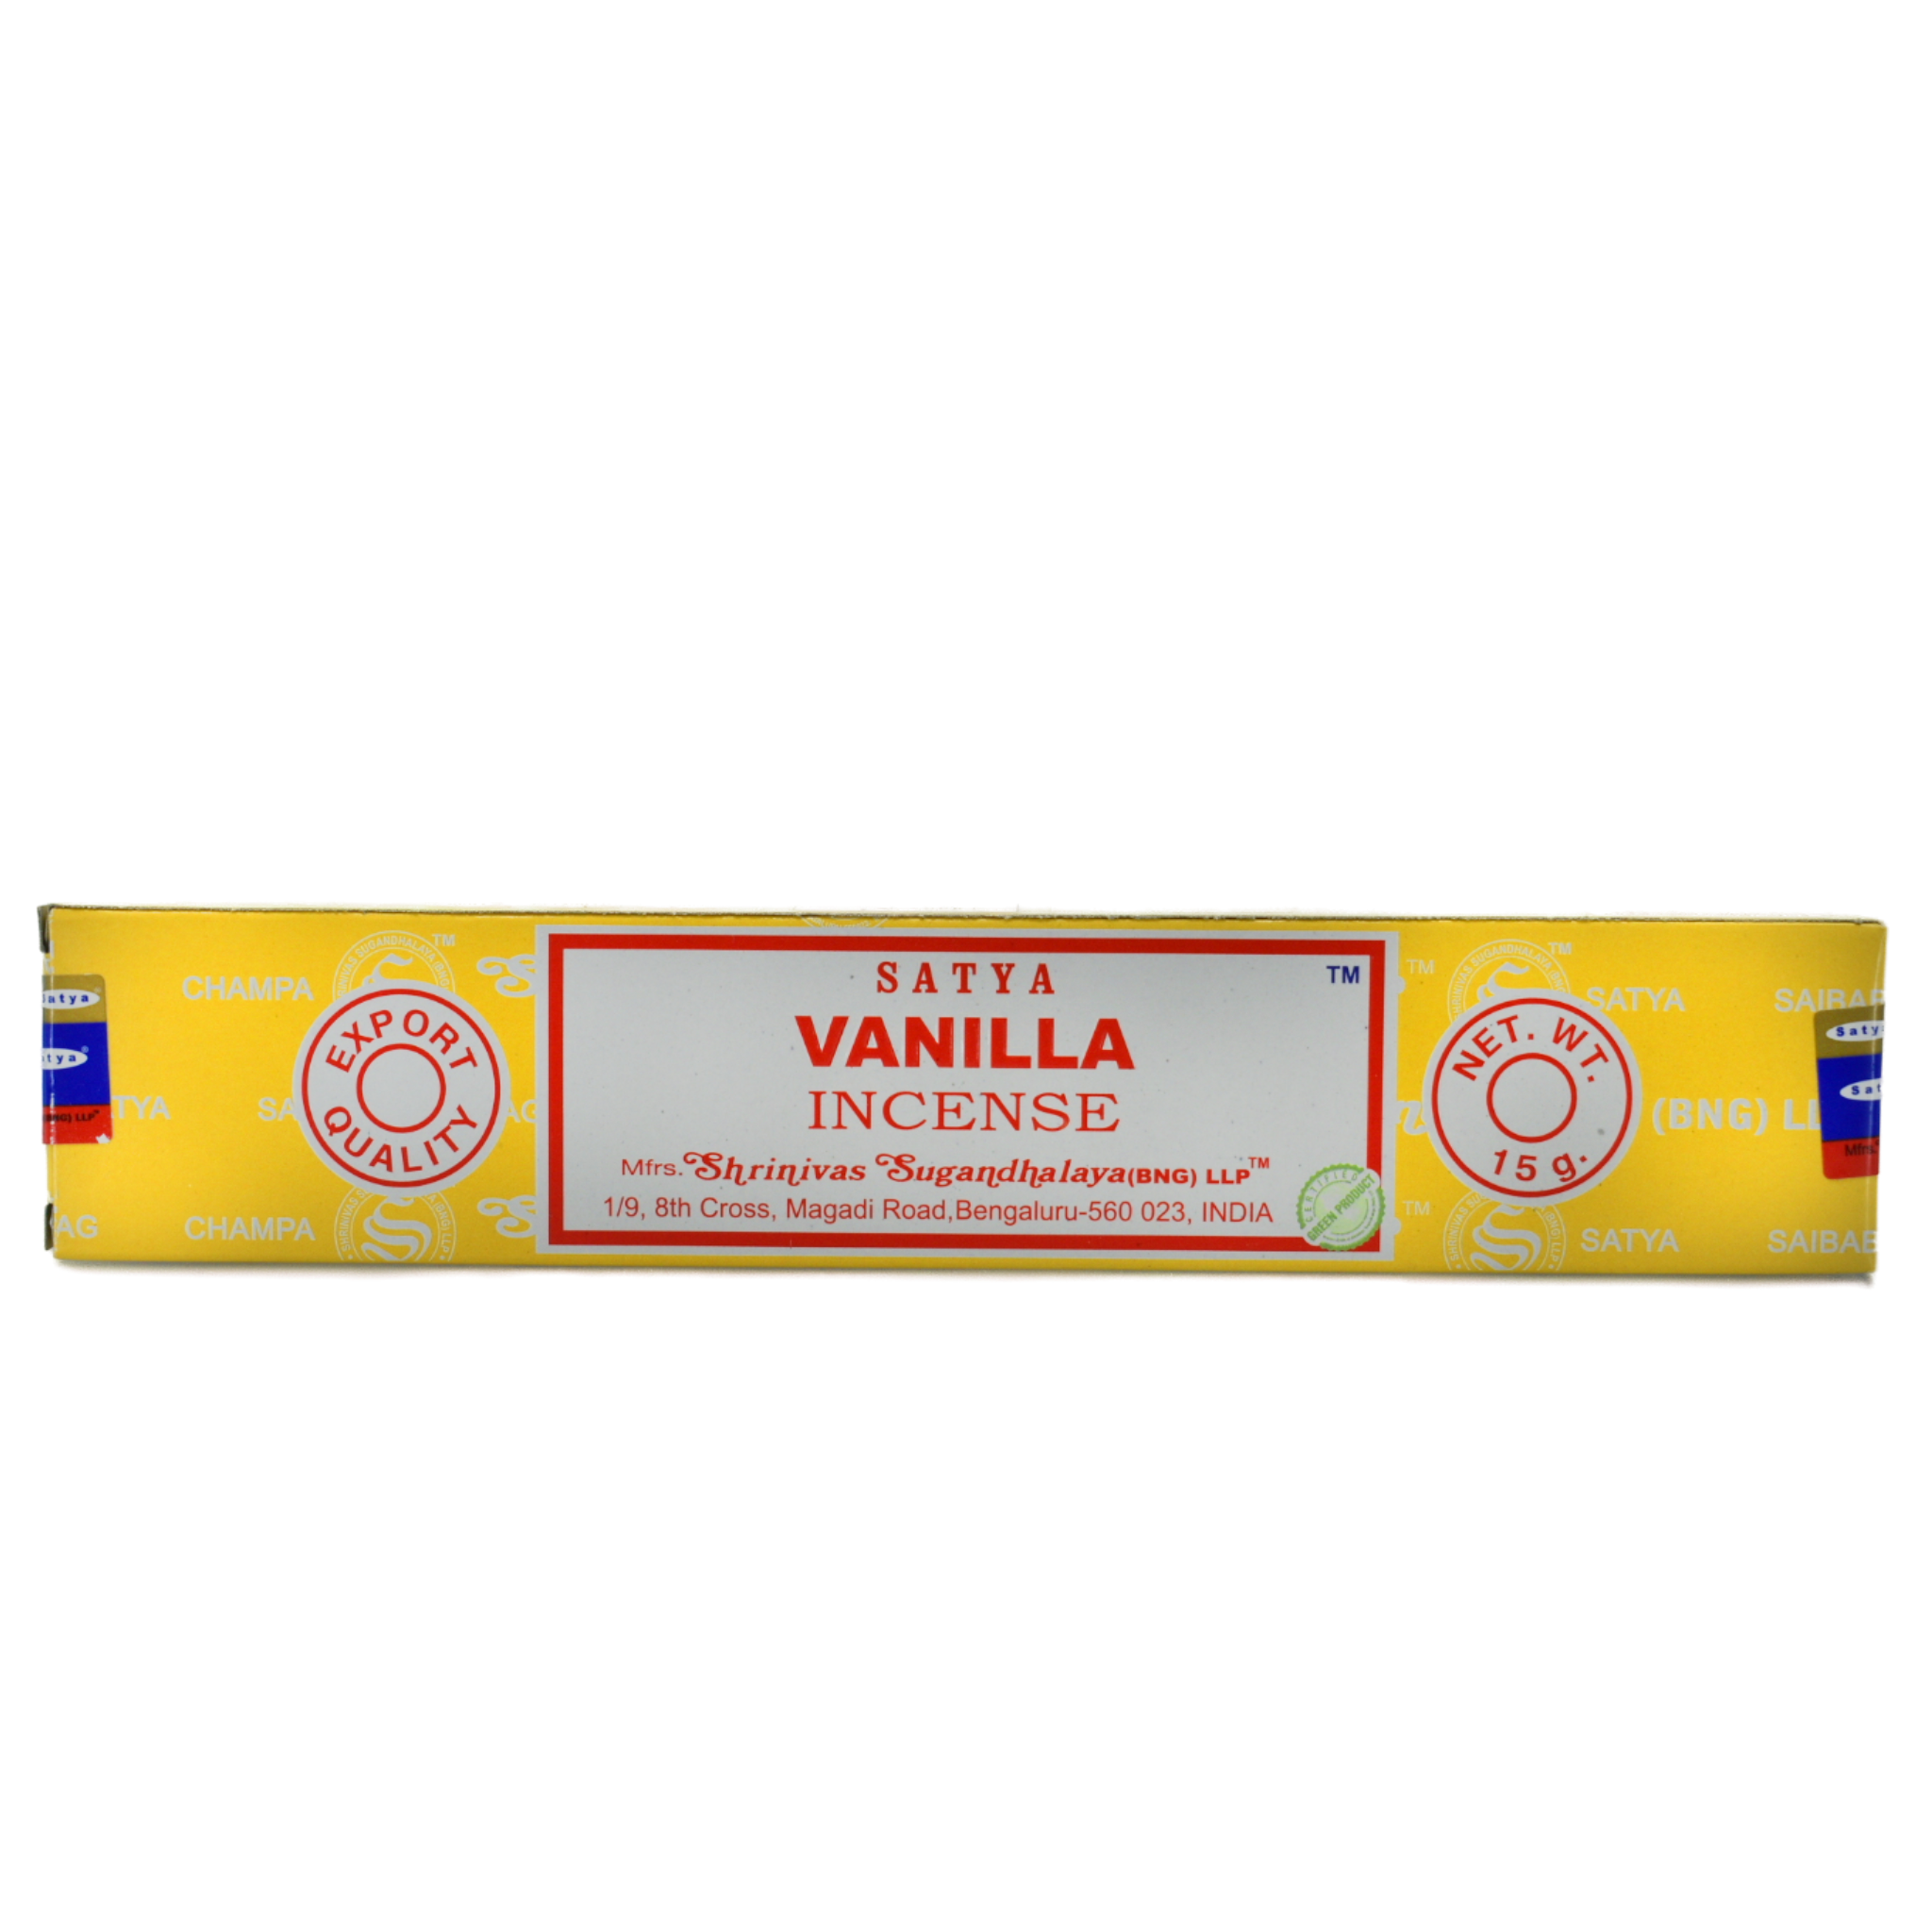 Vanilla Incense Sticks.  Box is yellow with white lines that have company words as a design. The center of the box has a white rectangle with a red frame within the border. In the rectangle the top line has the company name. The next rows have the title Vanilla Incense. At the bottom of the rectangle is the manufacturer&